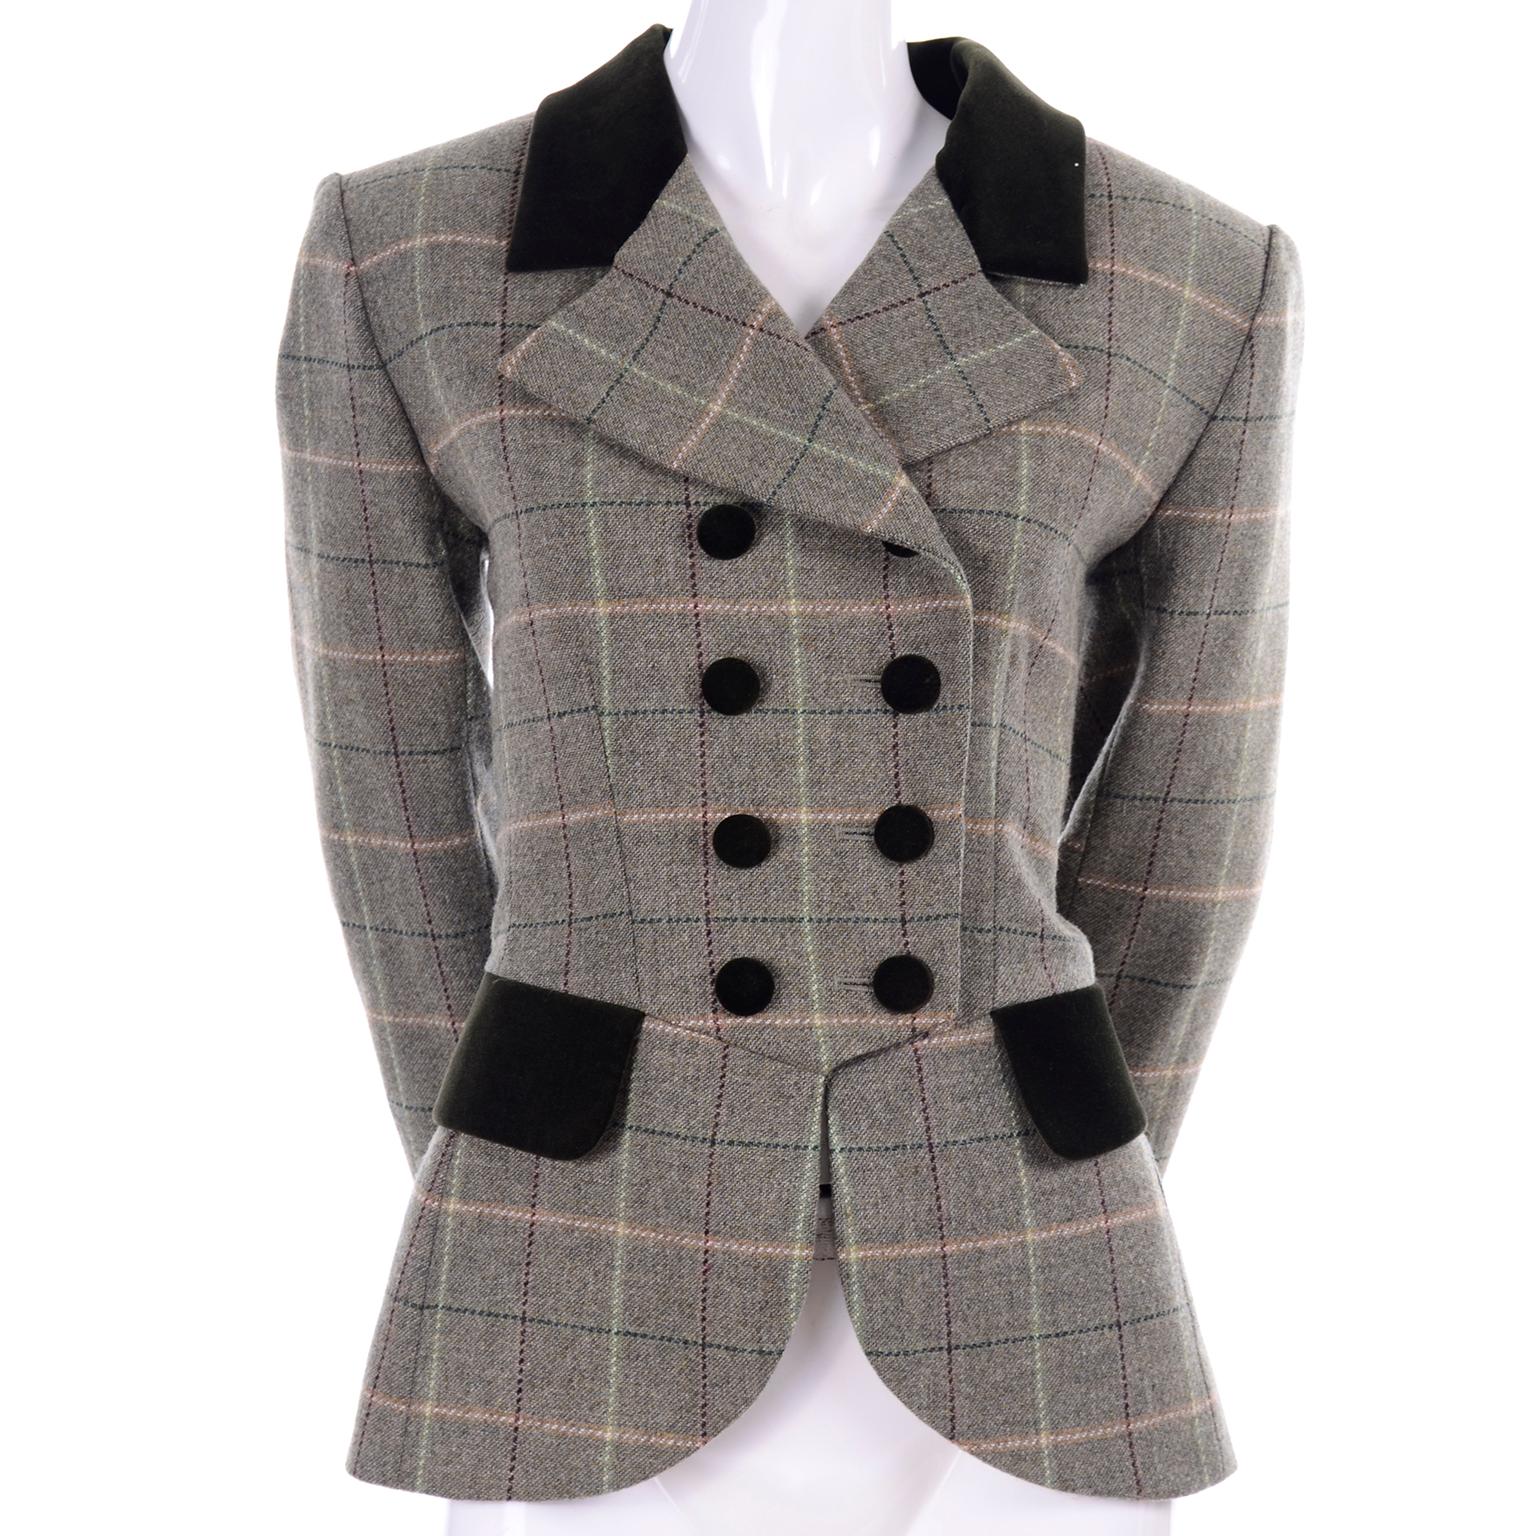 This plaid Yves Saint Laurent jacket has so much style. It is from Yves Saint Laurent Encore, a diffusion line, but there is no compromise in garment structure, style, and quality! Marked as H95, helping us date this blazer to a Fall/Winter 1995